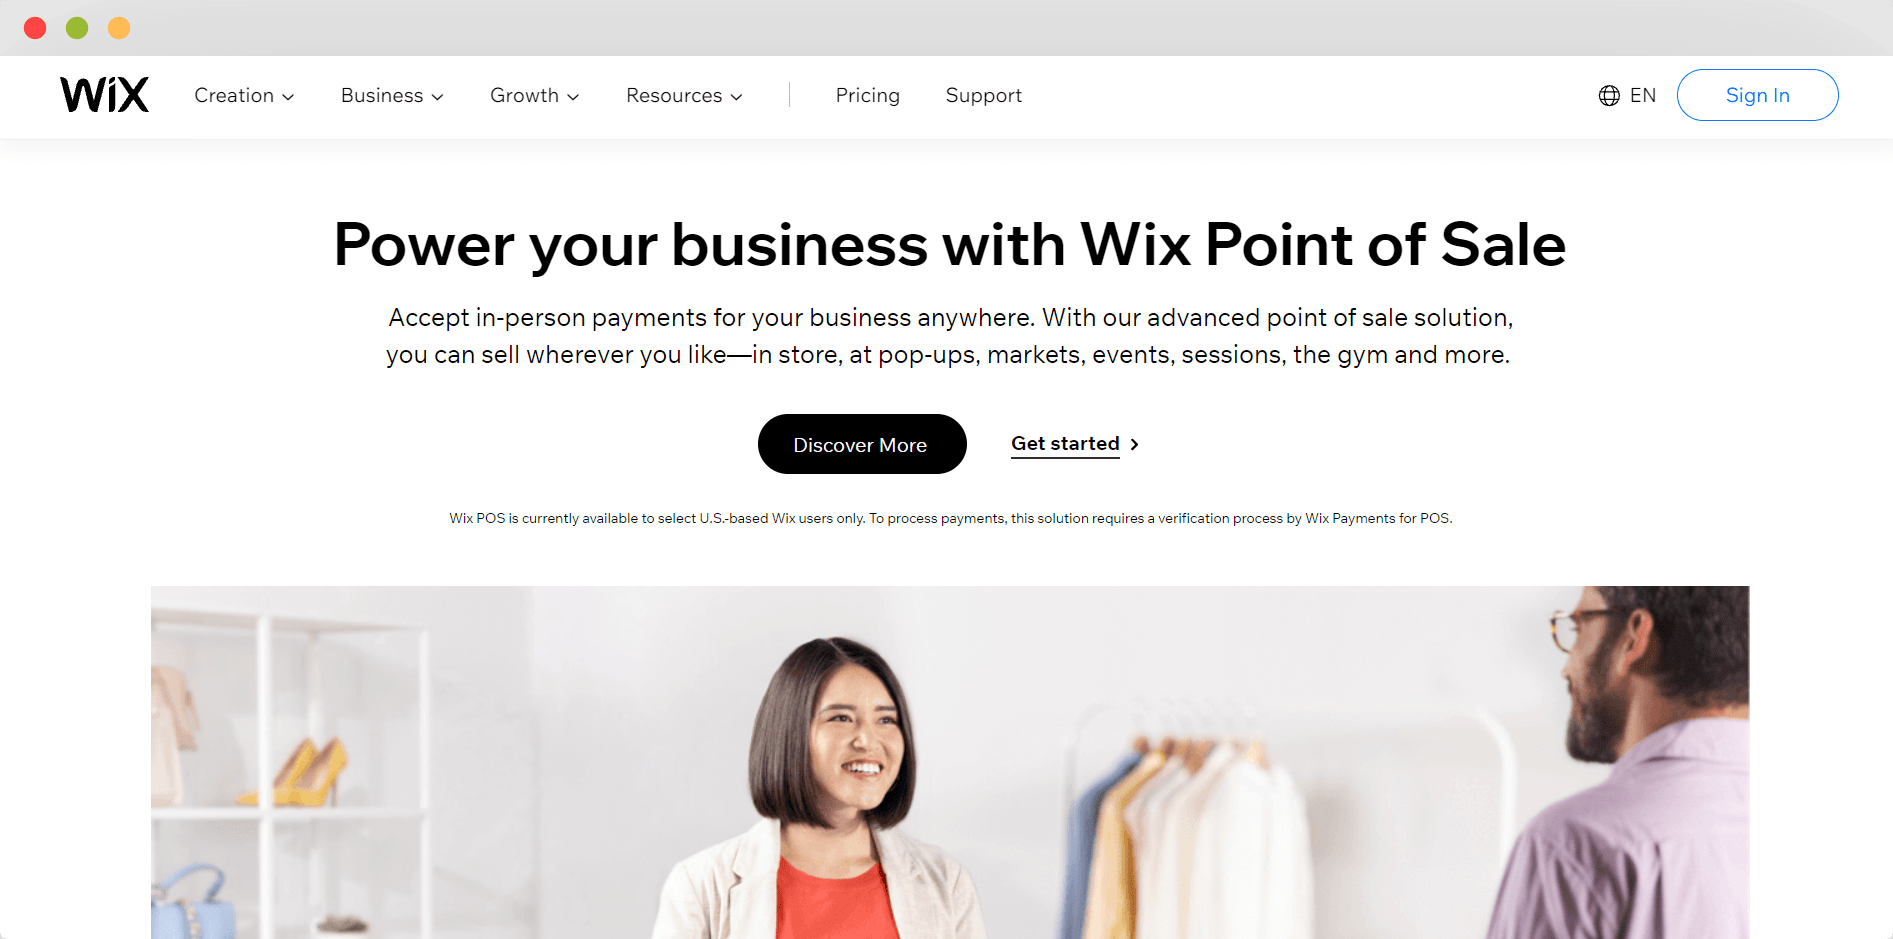 Wix POS solutions